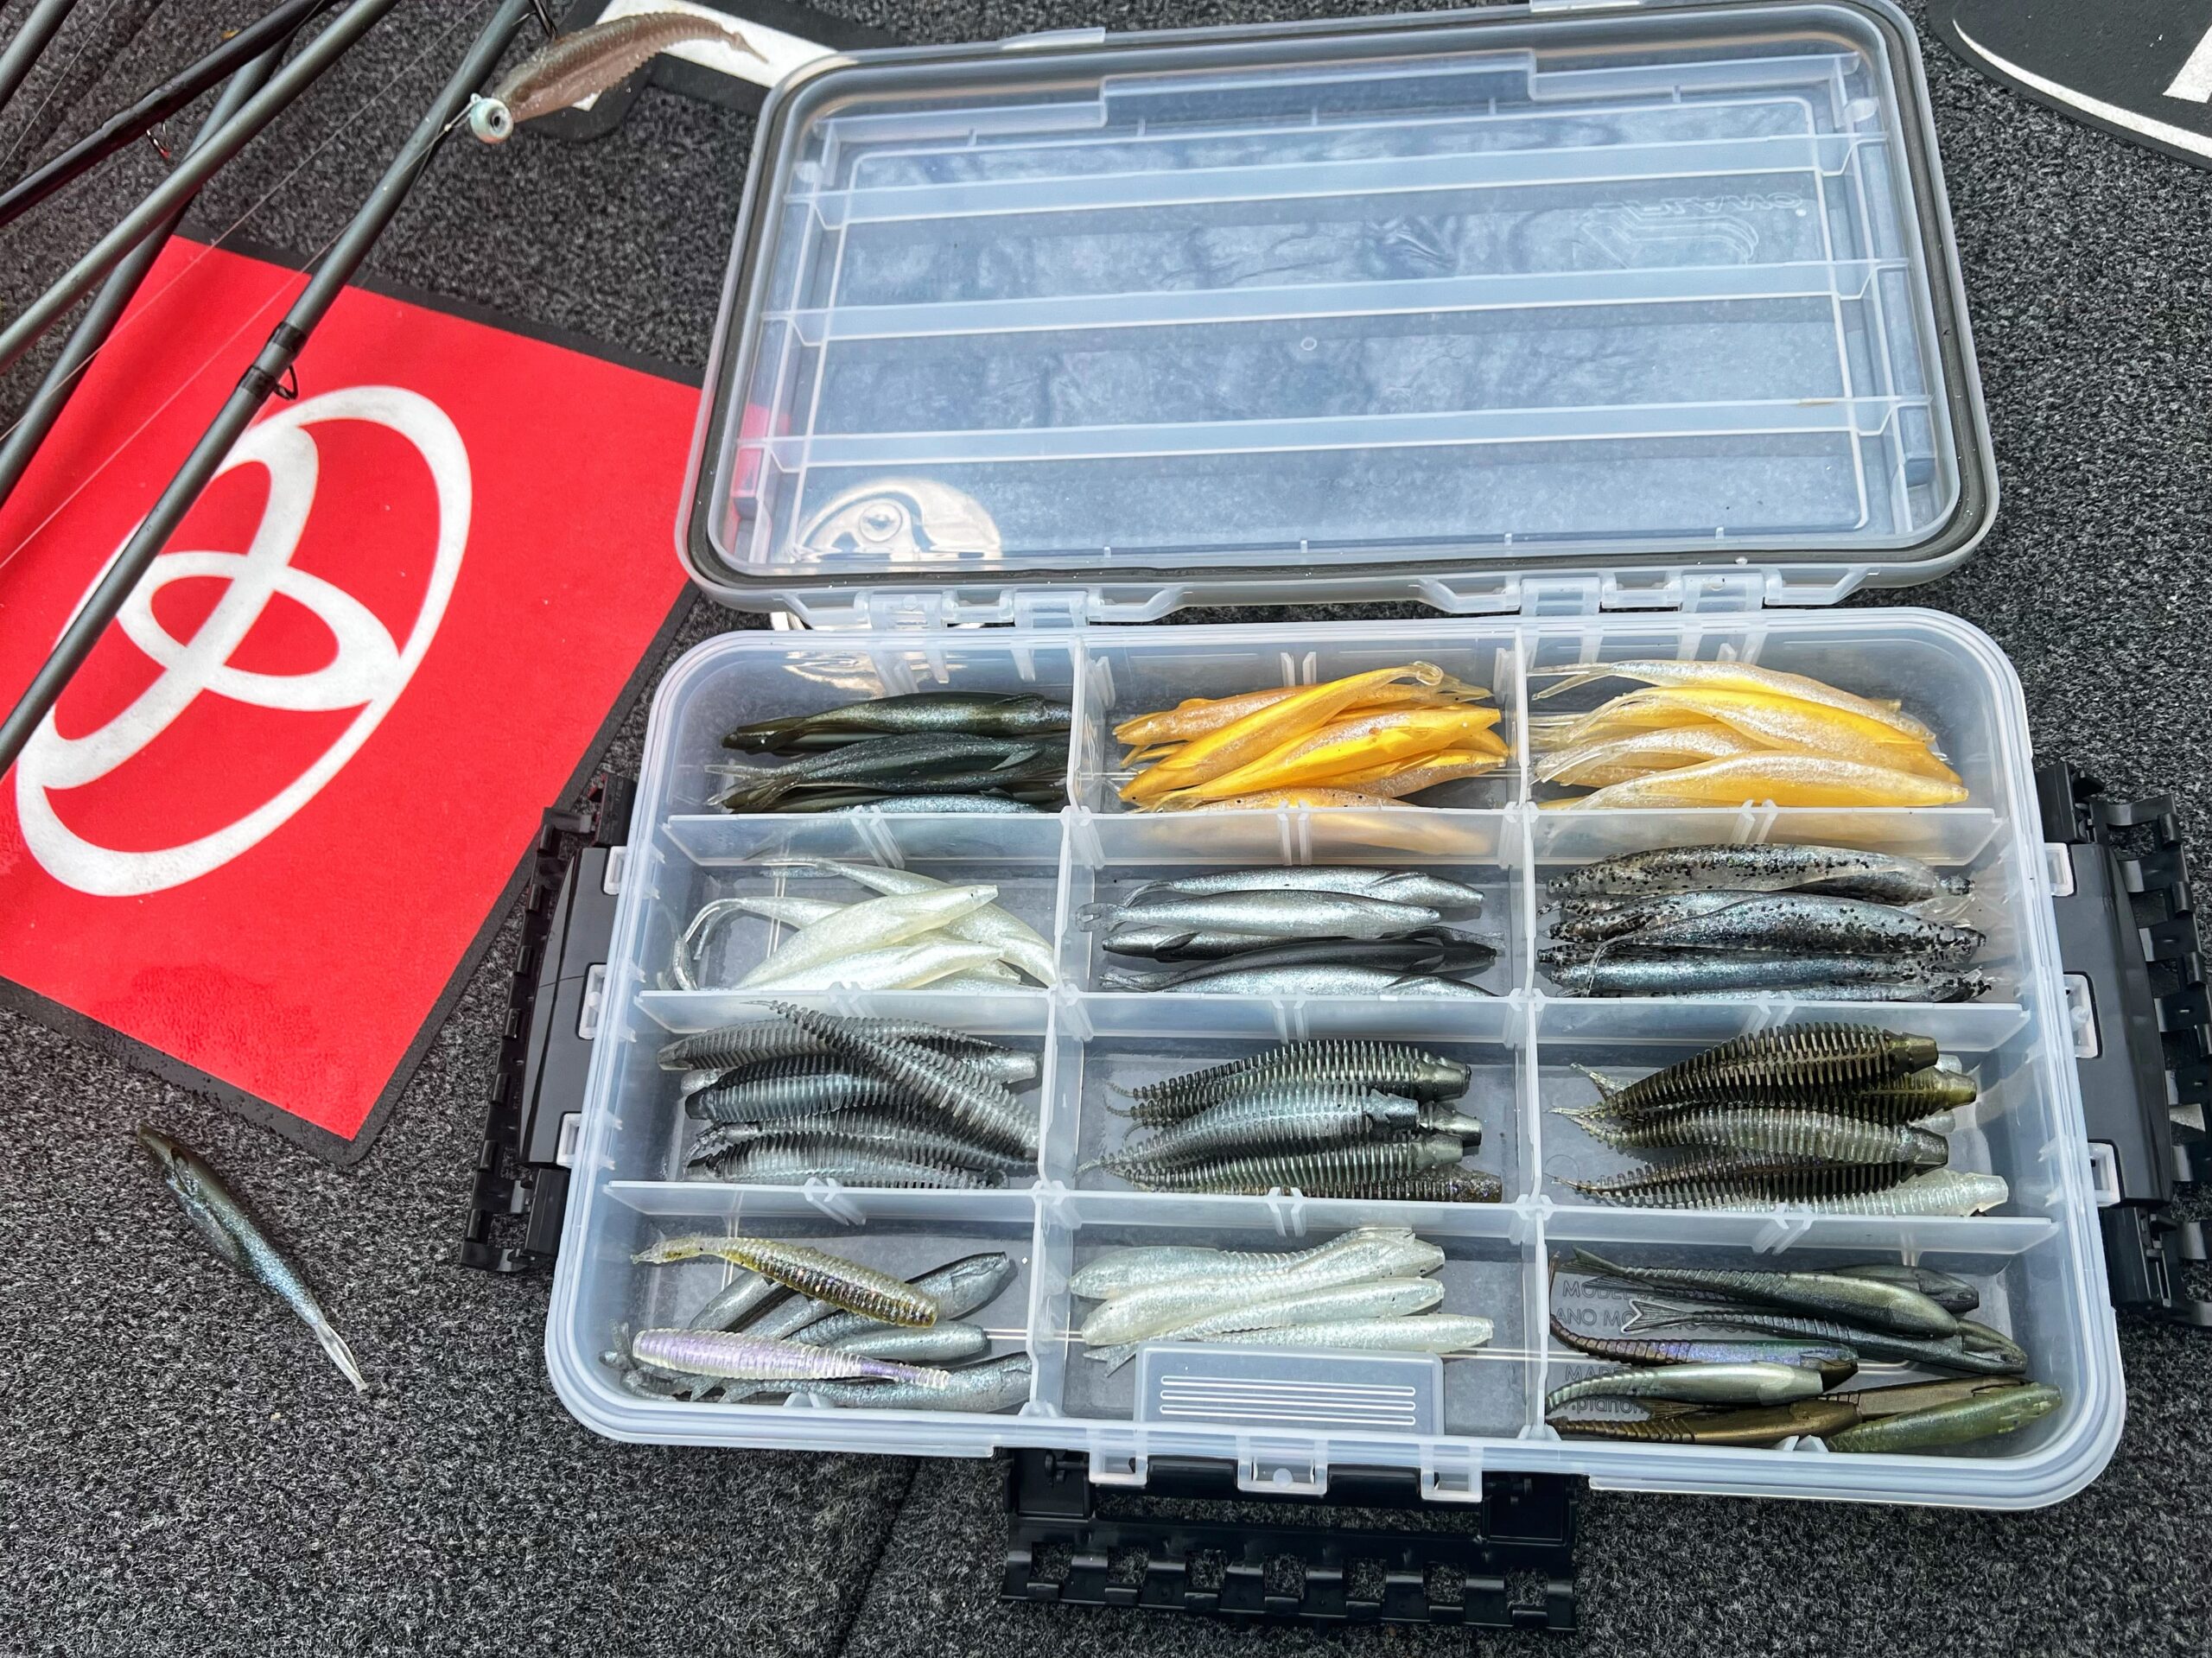 Big Show Scroggins making use of homemade minnows during Stage Three -  Major League Fishing